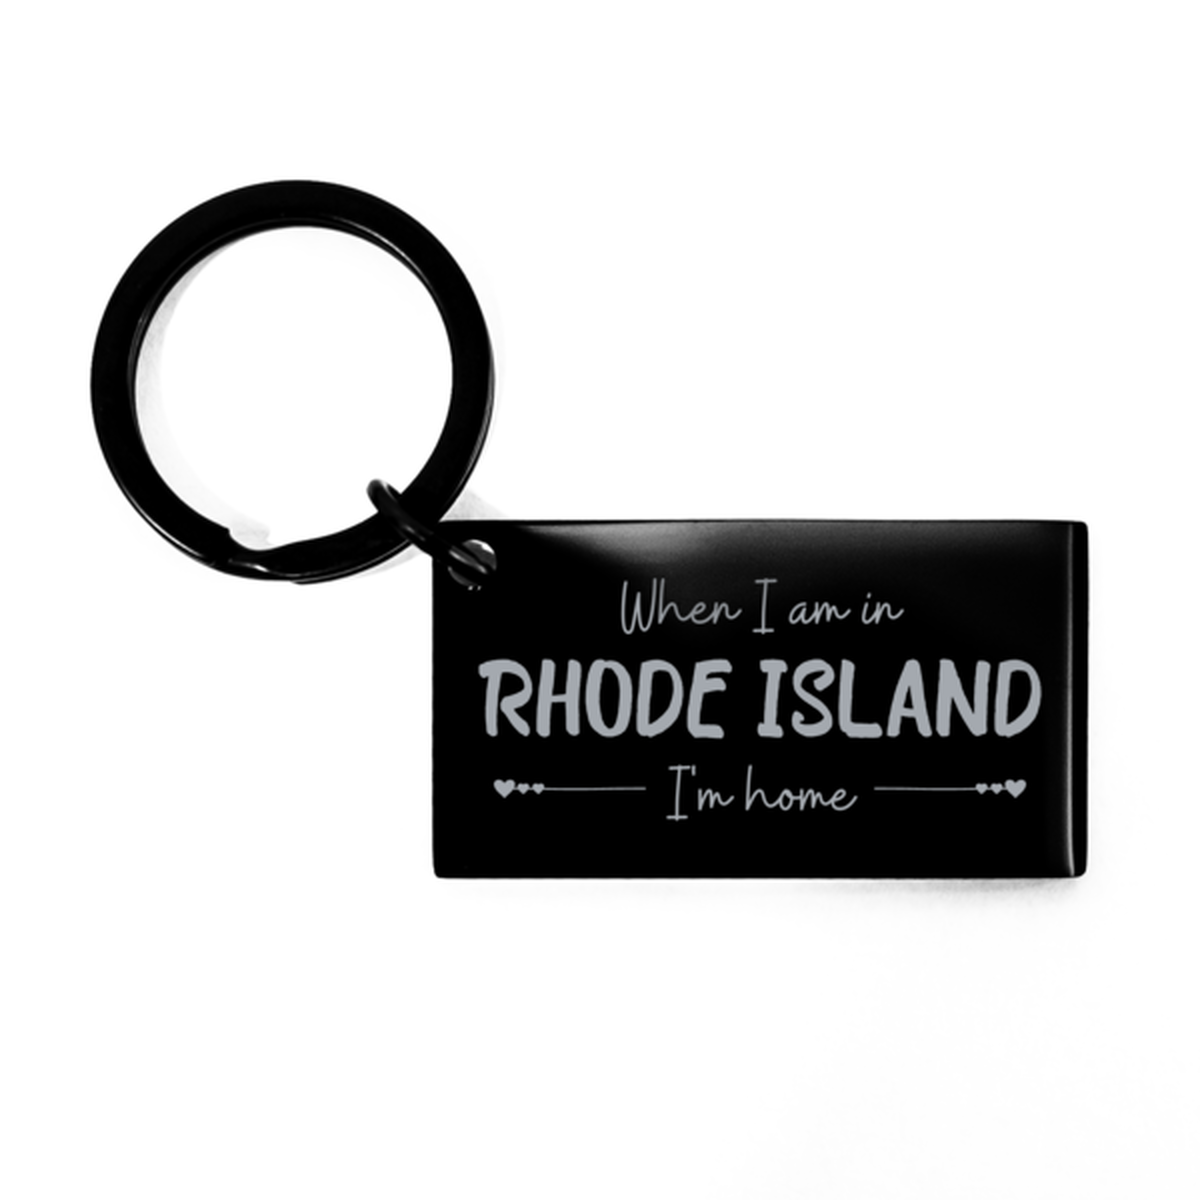 When I am in Rhode Island I'm home Keychain, Cheap Gifts For Rhode Island, State Rhode Island Birthday Gifts for Friends Coworker